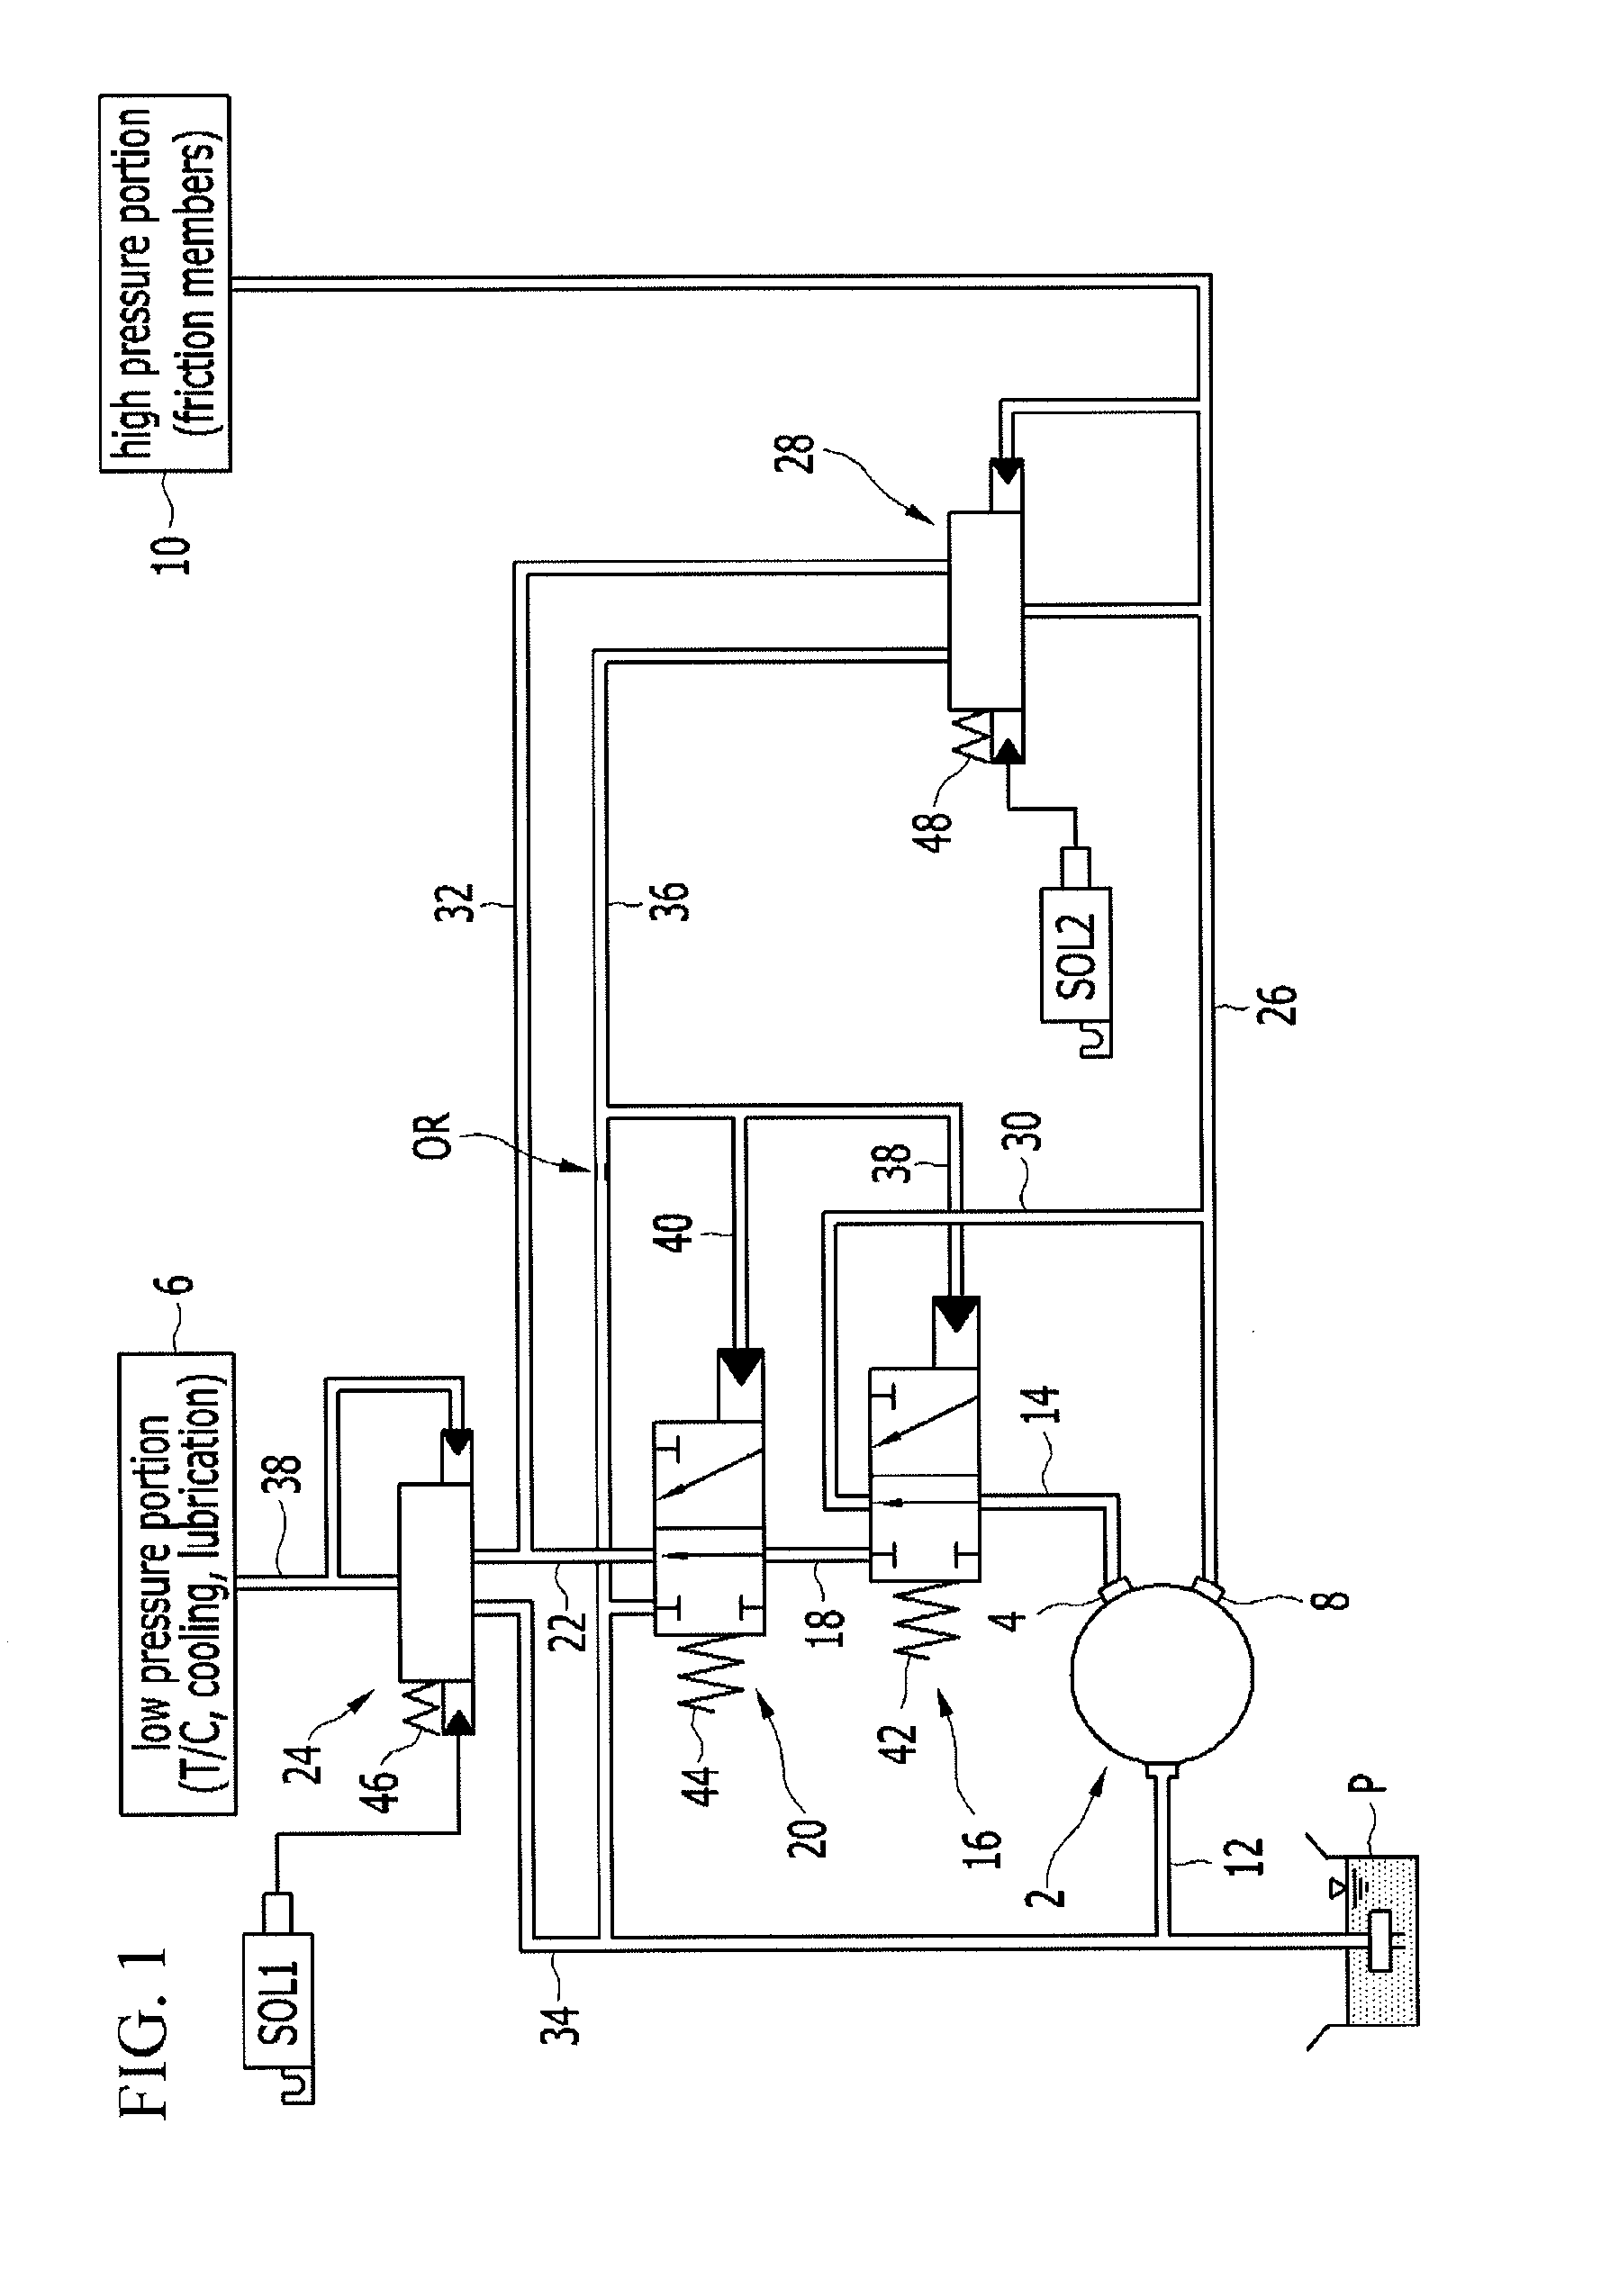 Hydraulic pressure supply system of automatic transmission for vehicle